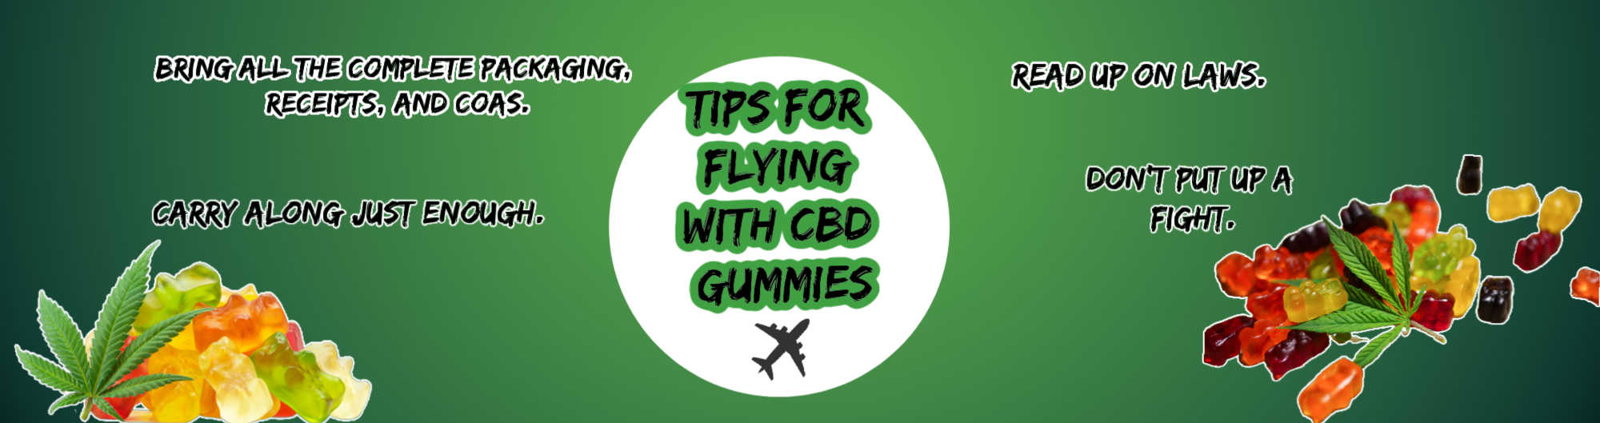 image of flying with cbd gummies